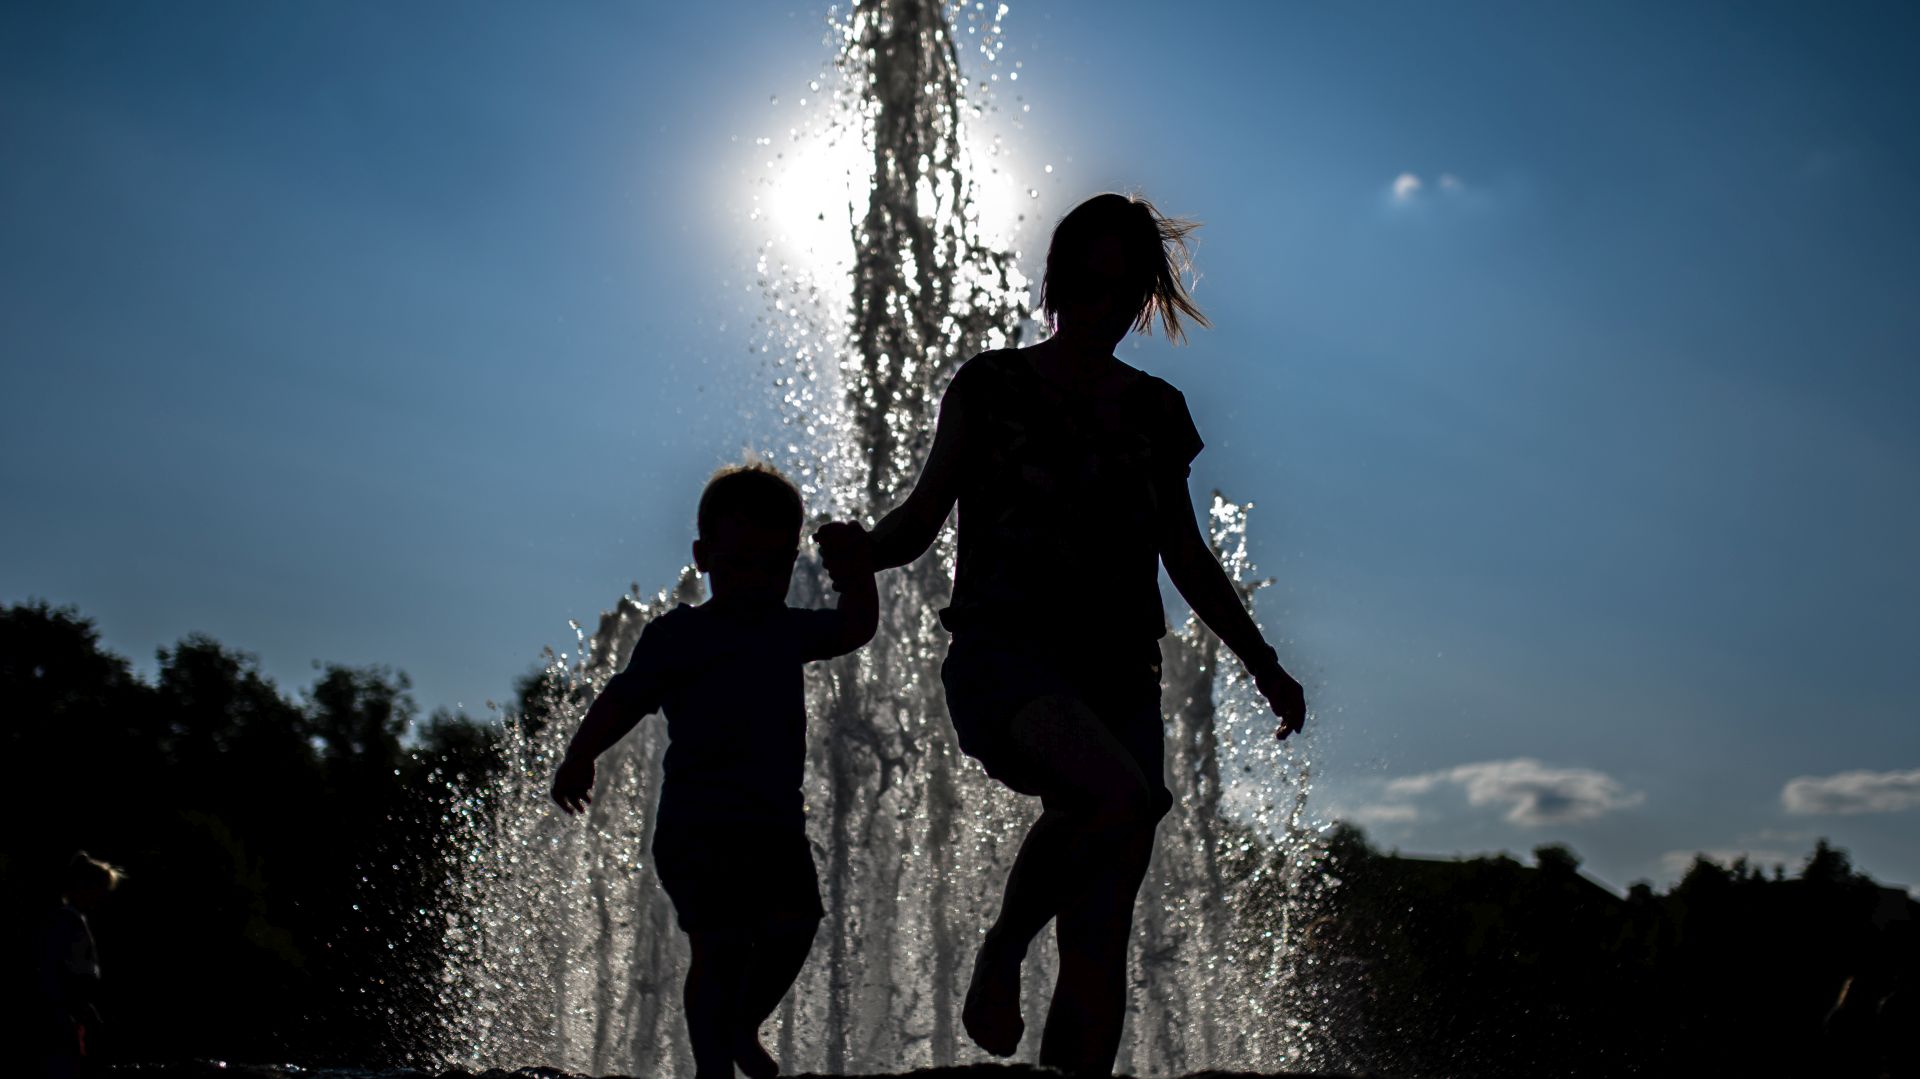 epa07742763 A woman and a child walk hand in hand in front of a fountain at Lustgarten park, during a hot and sunny weather in Berlin, Germany, 26 July 2019. Germany experiences a heatwave with temperatures up to 41 degrees Celsius.  EPA/CLEMENS BILAN